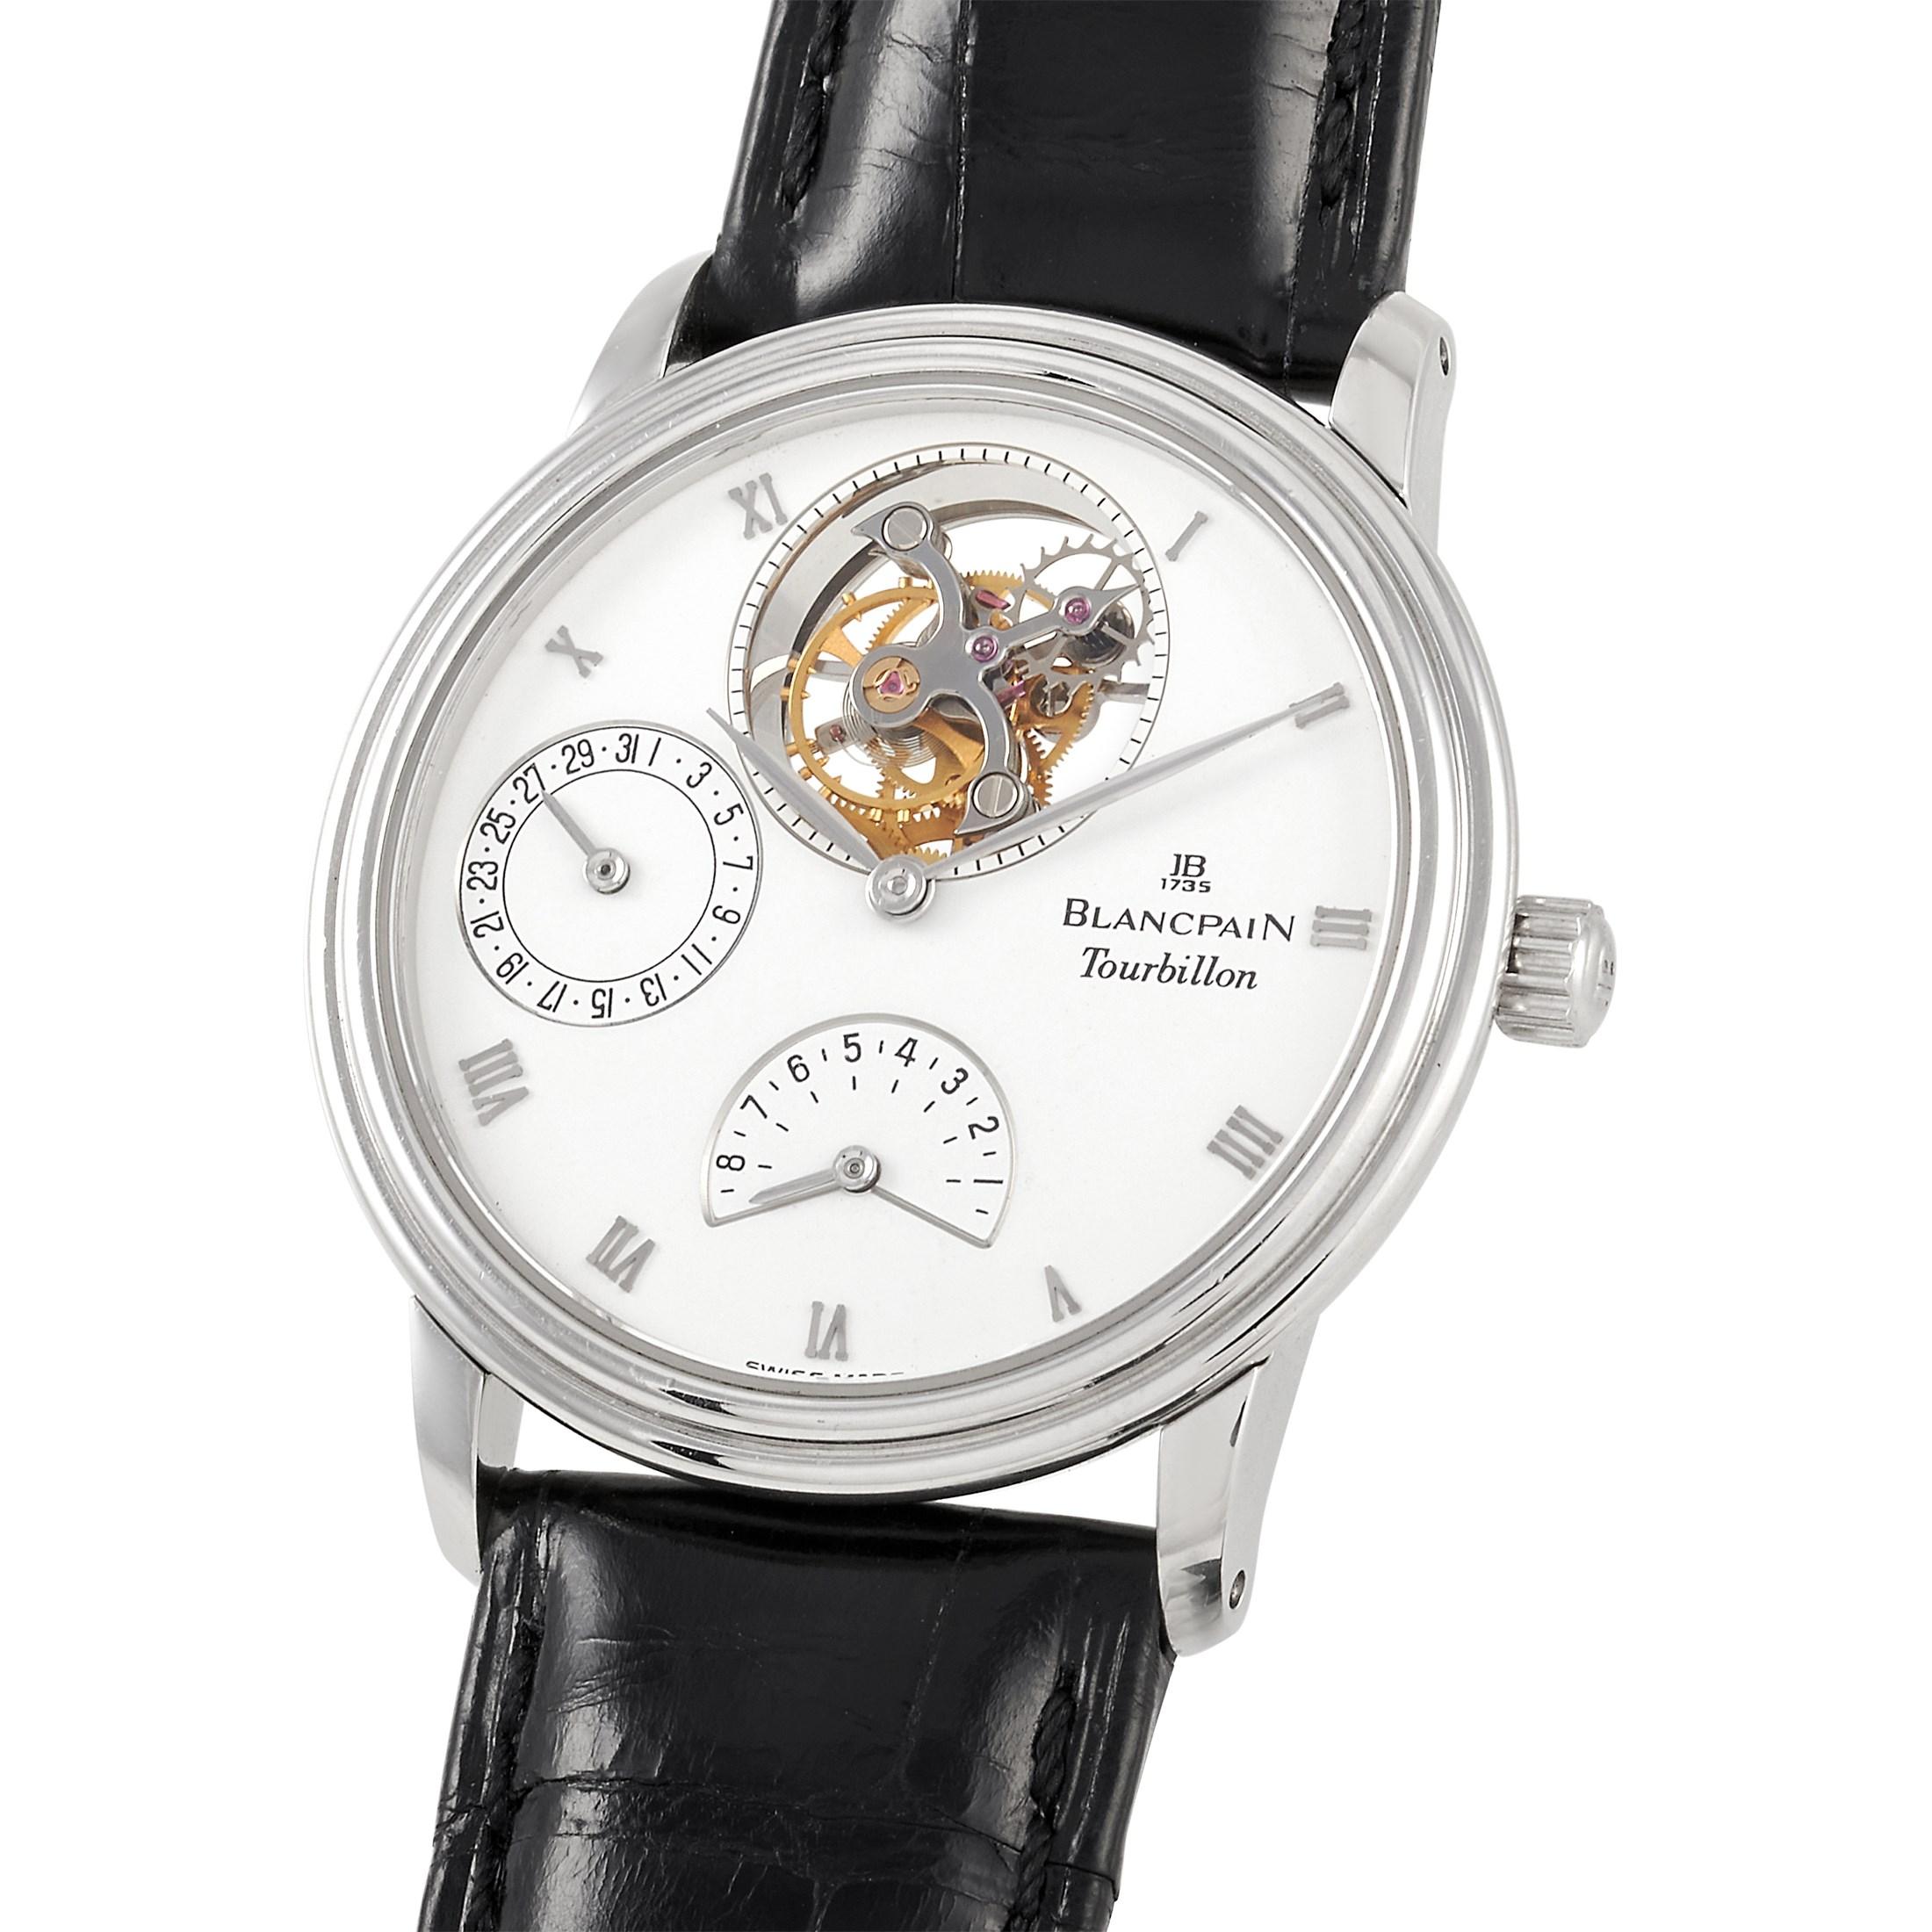 This BlancPain Villeret Tourbillon Watch, reference number 0023-3427-58, features a fine platinum case that measures 34 mm in diameter. The case is presented on a black leather strap with tang closure. The open case back offers a glimpse into the